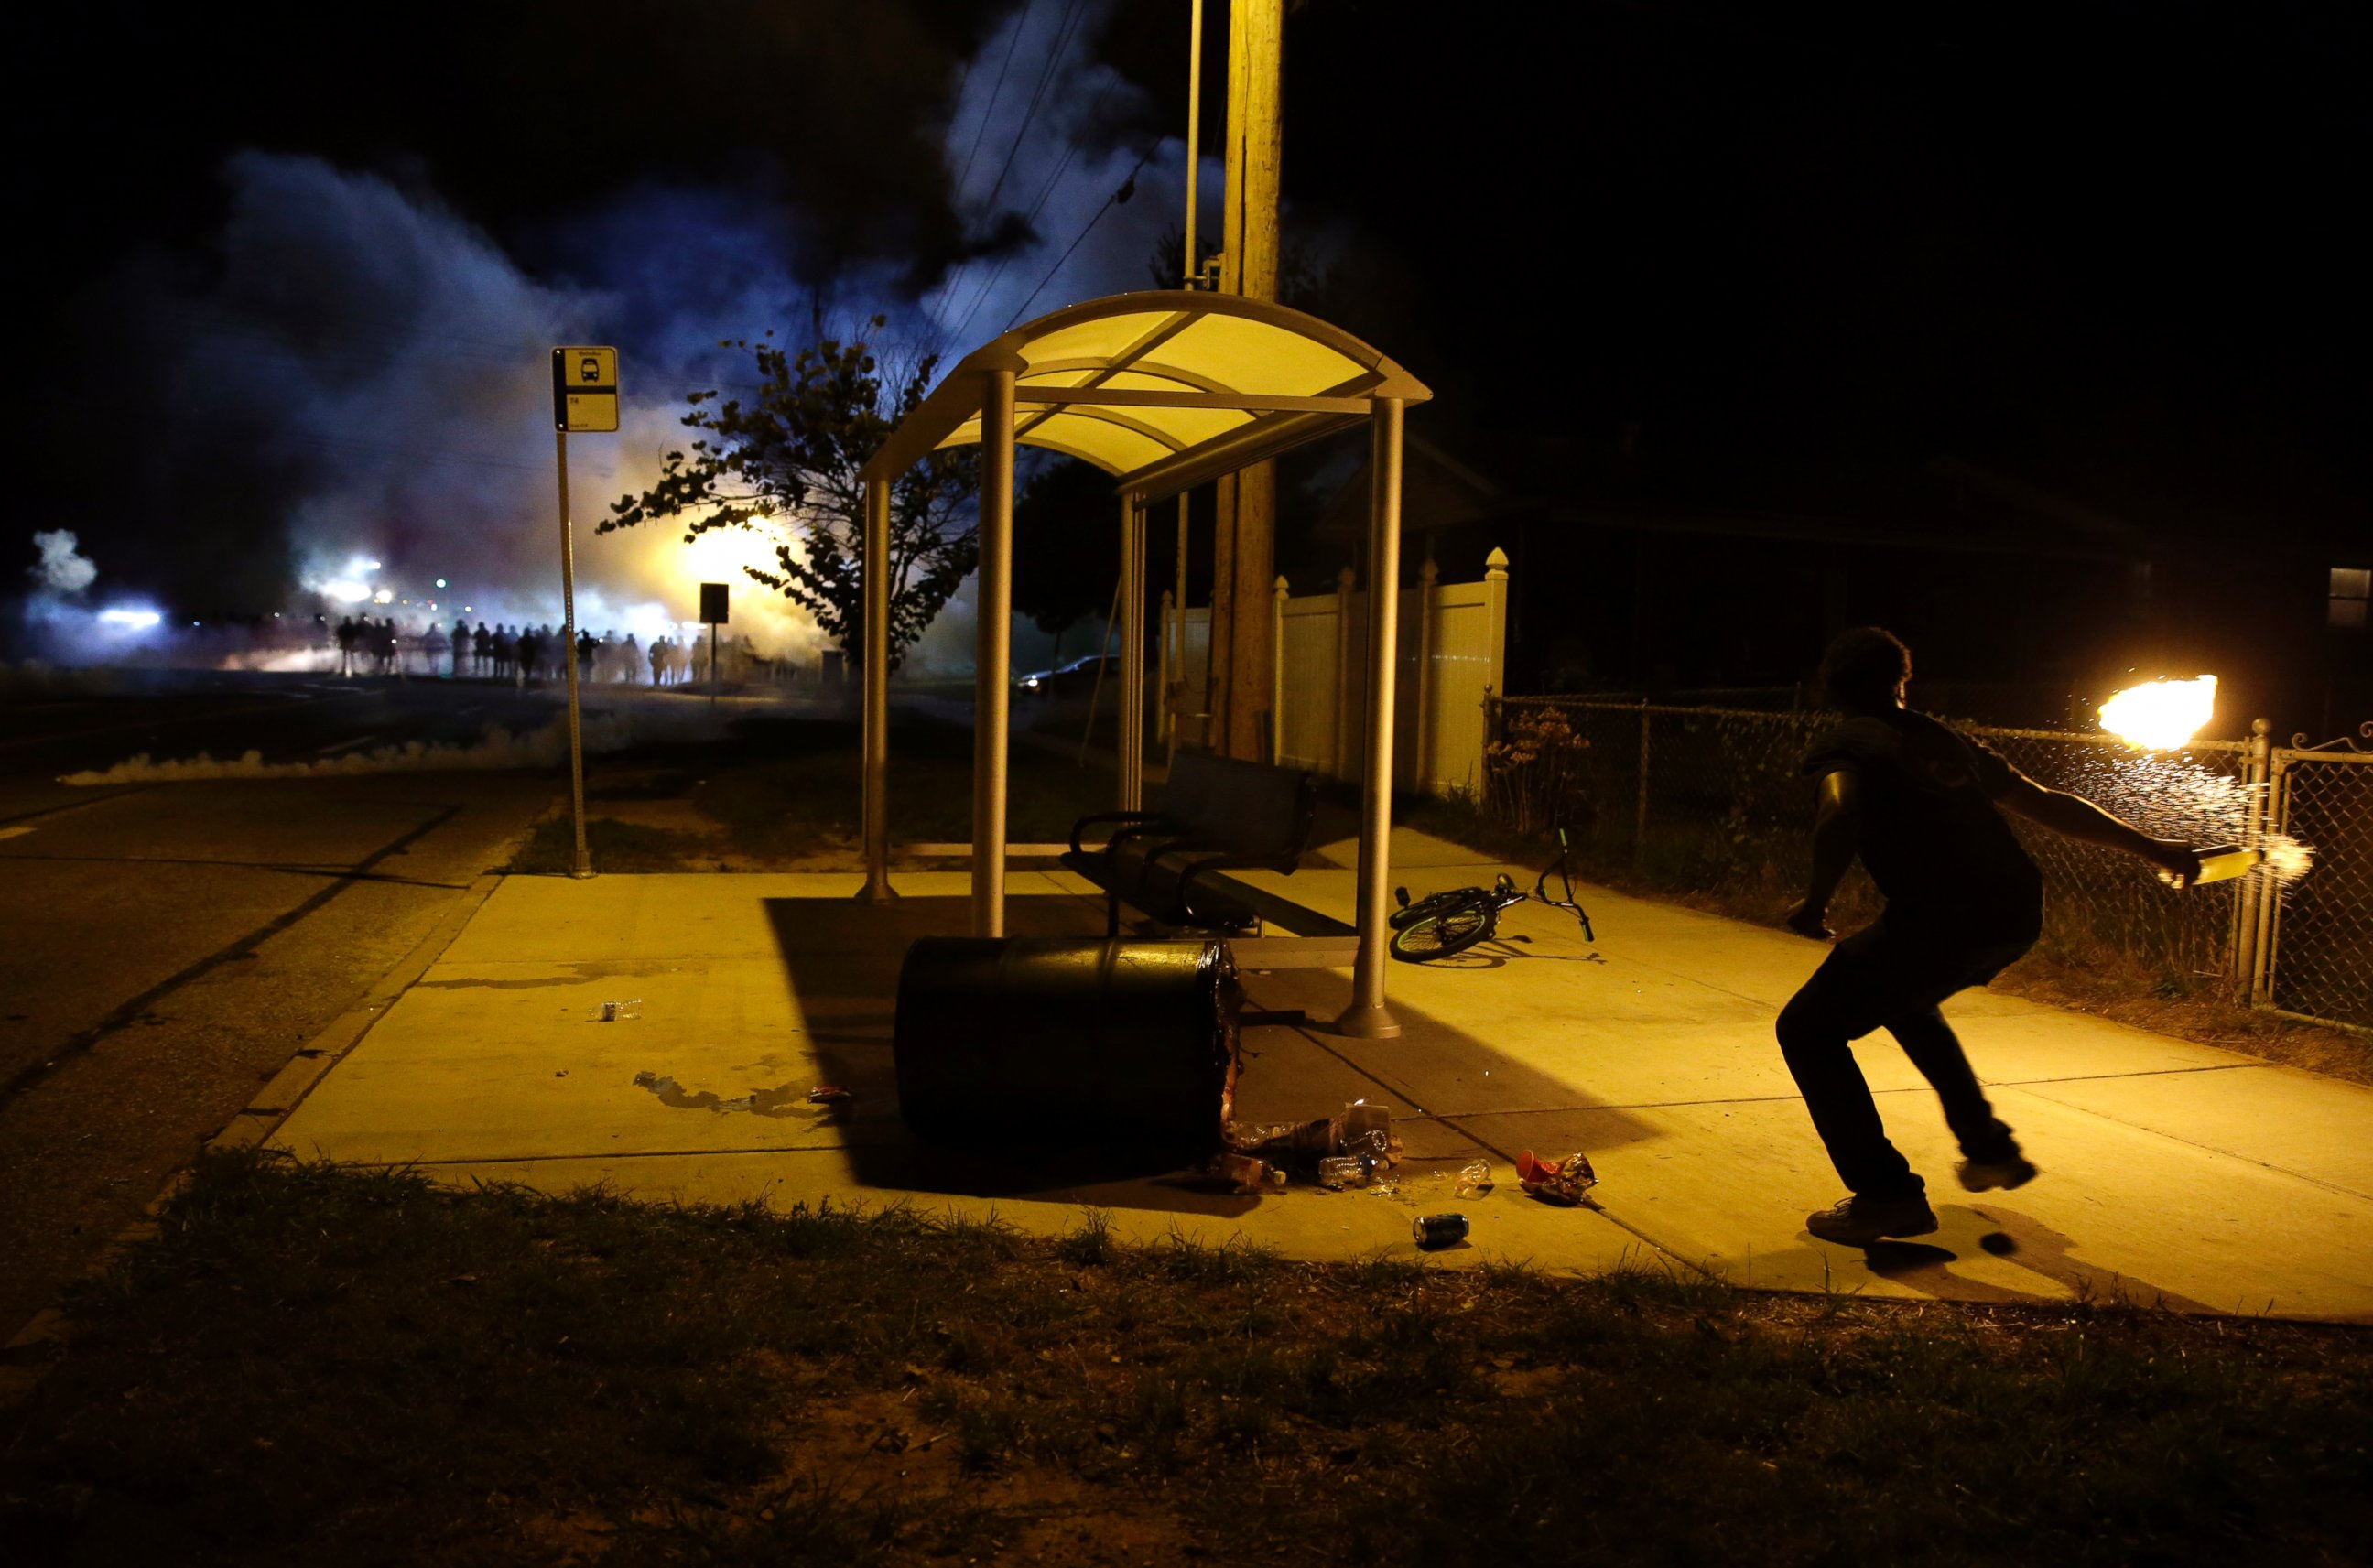 PHOTO: A man picks up a flaming bottle and prepares to throw it as a line of police advance in the distance, Aug. 13, 2014, in Ferguson, Mo.